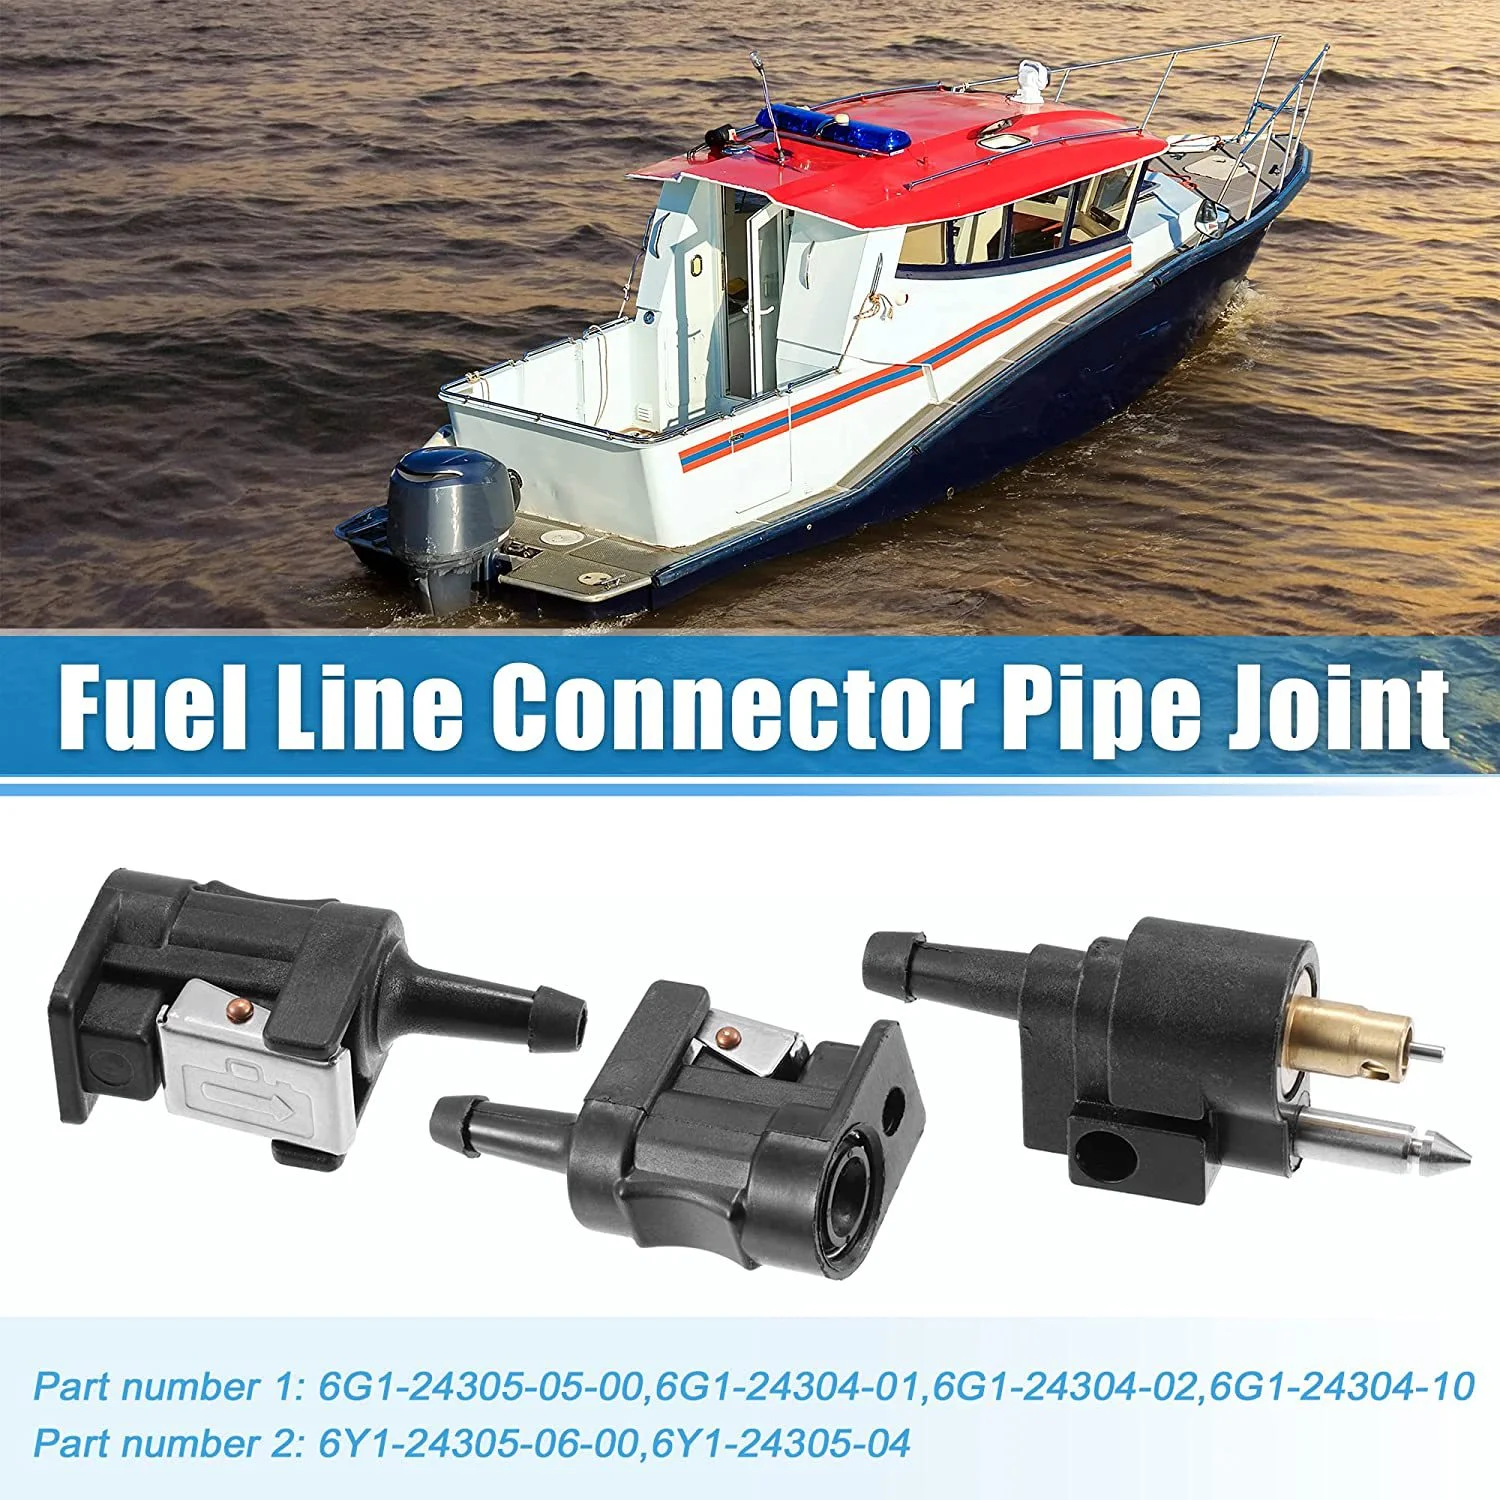 Marine Outboard Oil Tank Fuel Line Male/ Female Sockets Quick Coupling Yachts/Fishing Boats/Fast Boats/Cruise Ships Accessories summer men s basketball tank top breathable quick drying sportswear free custom printed letter tank top men s casual running set